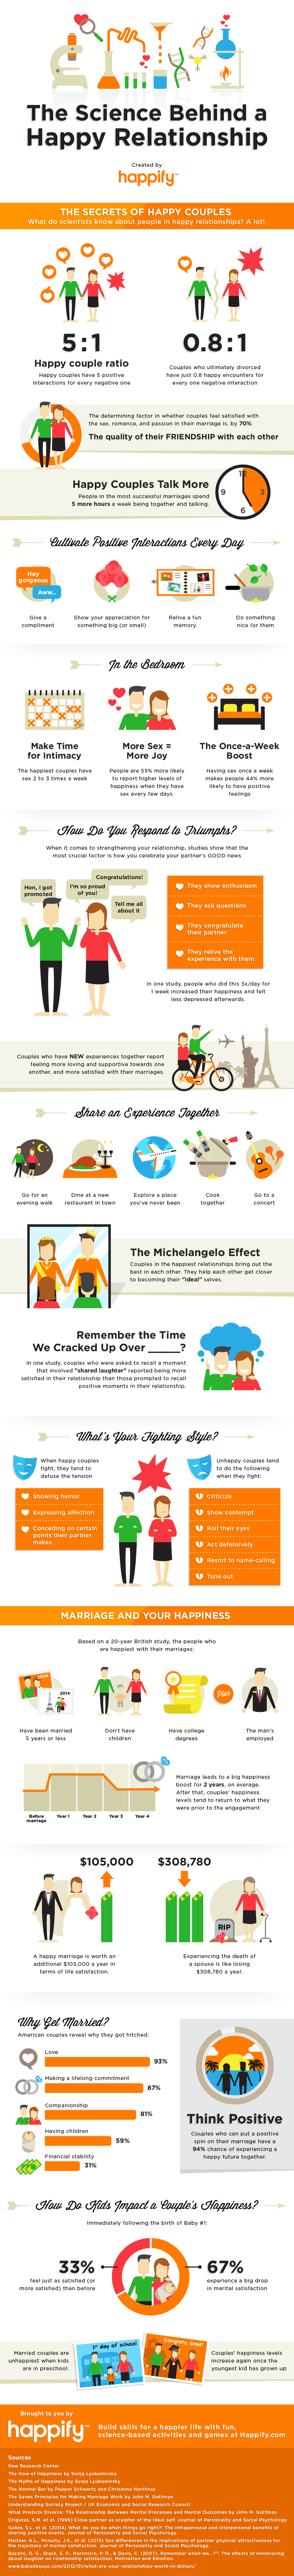 Infographic for Behind a Happy Relationship - An Infographic